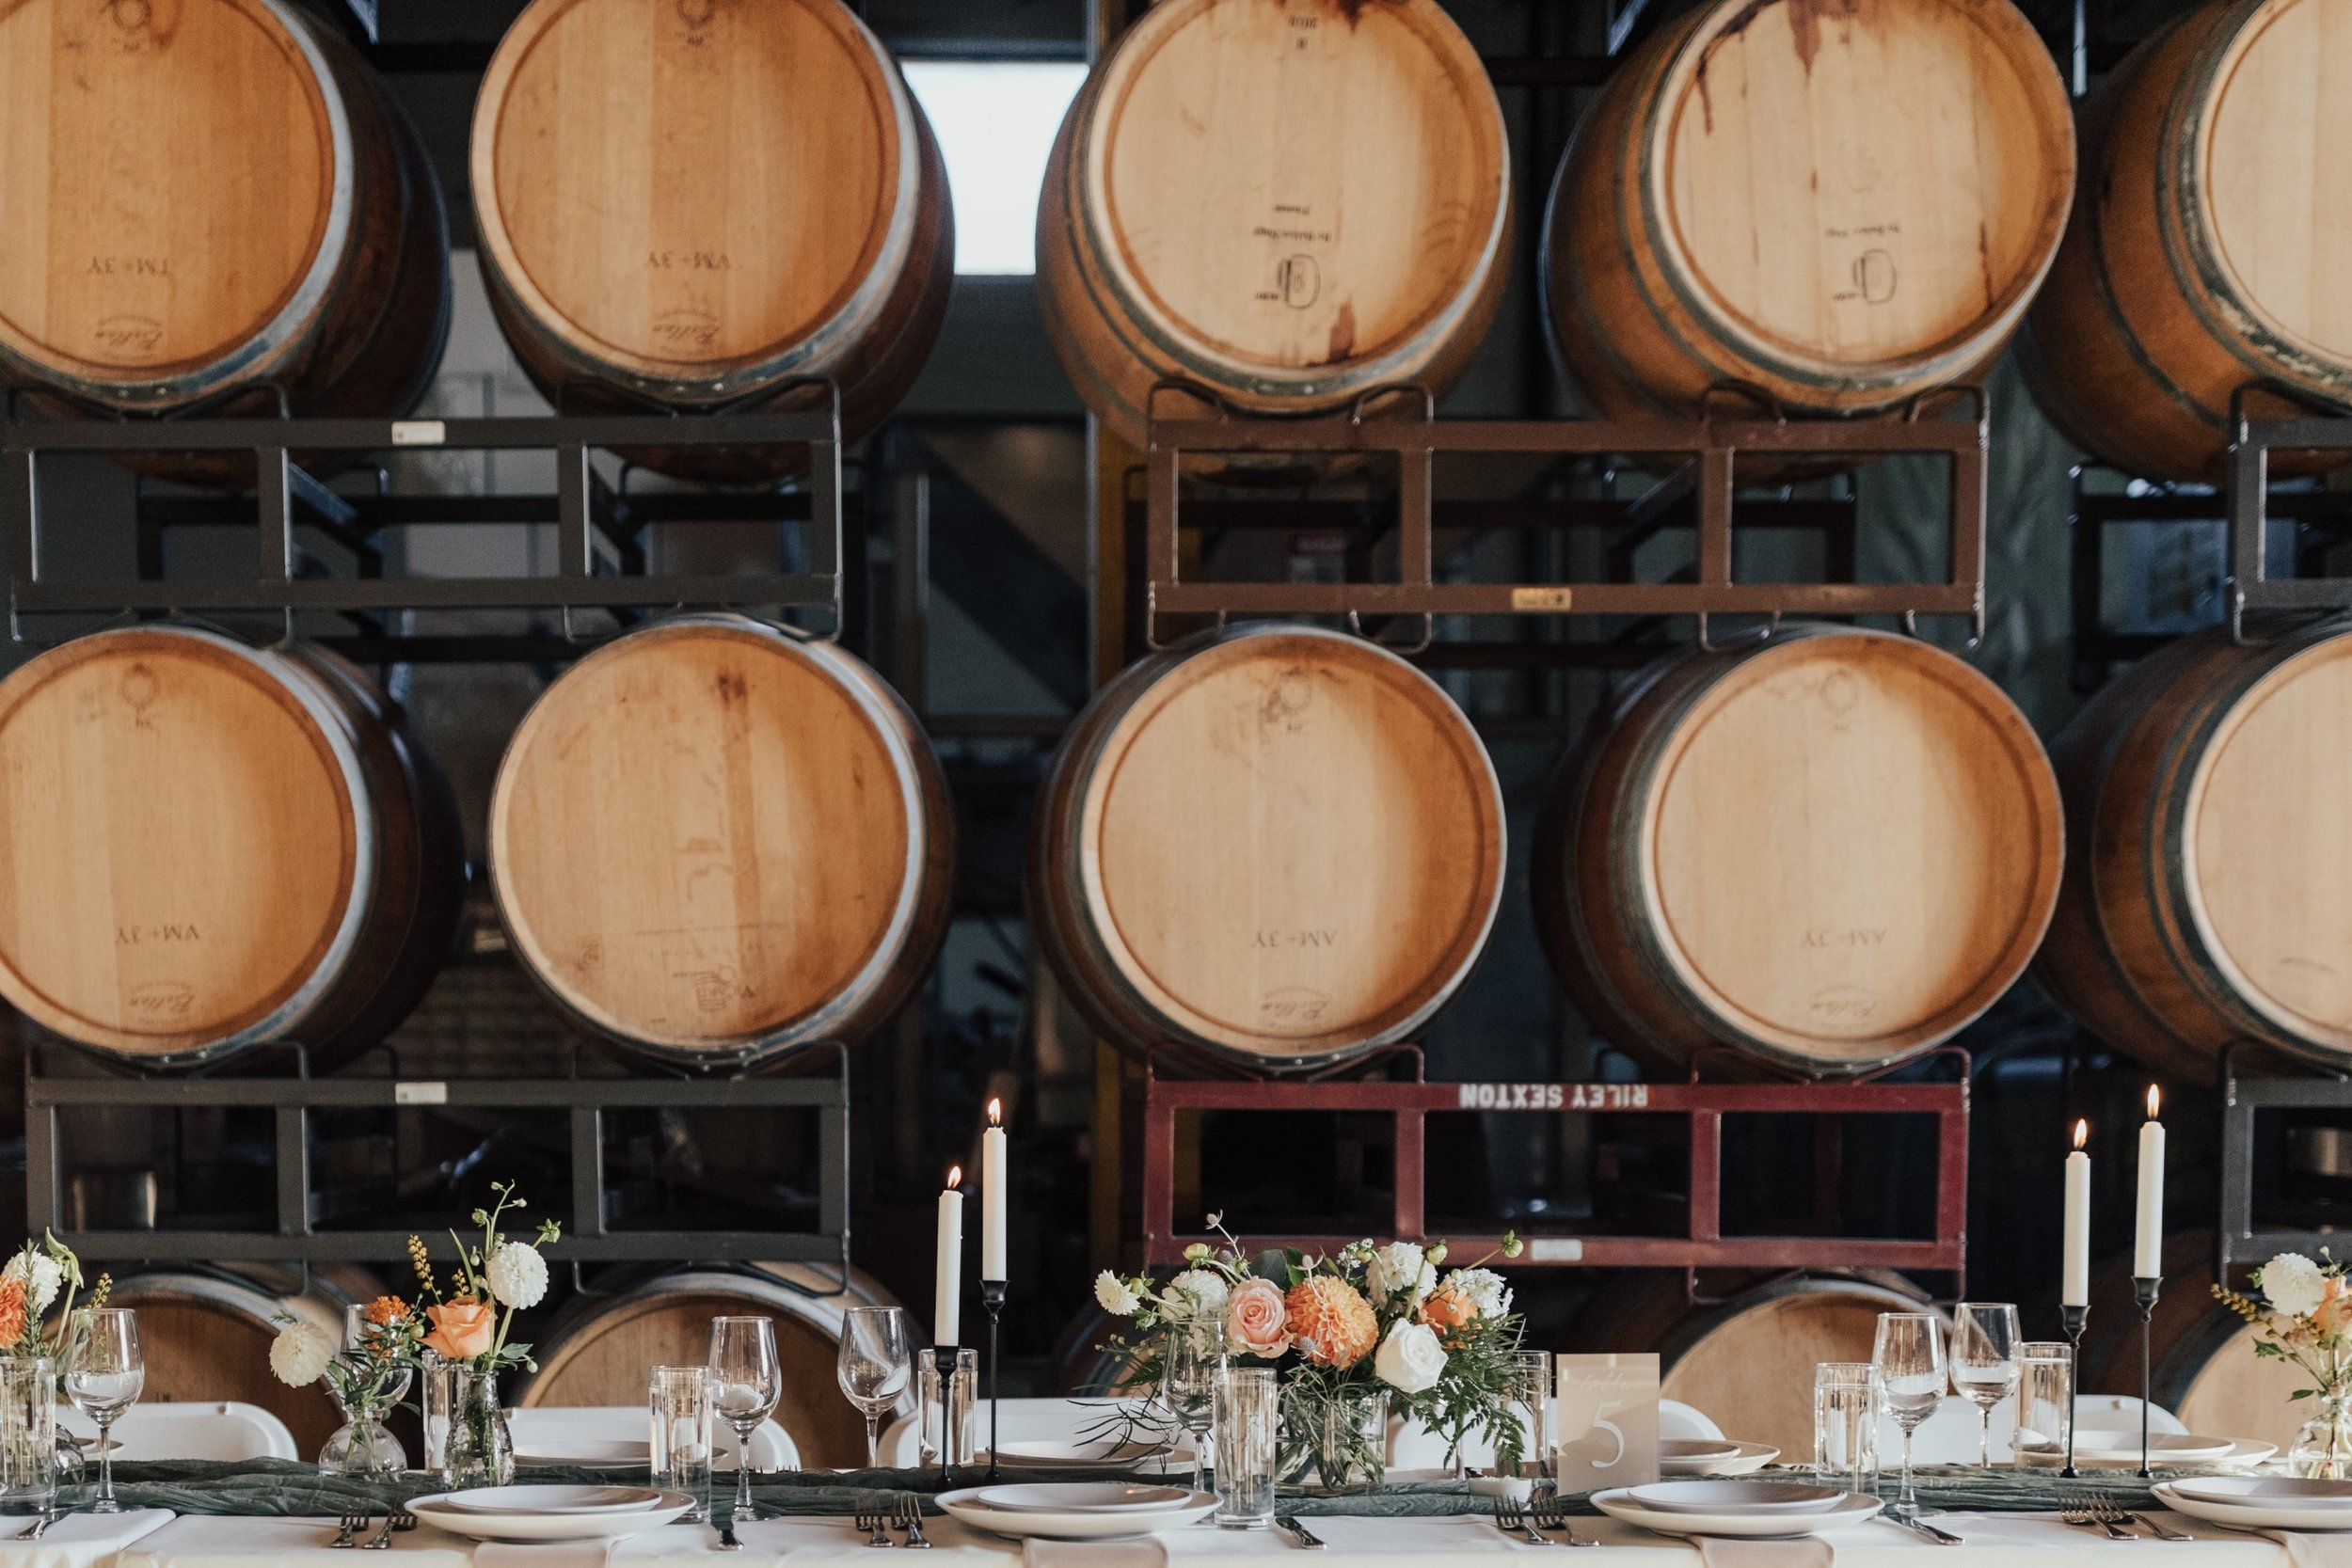 pacific-engagements-seattle-wedding-venue-almquist-winery-barrel-room-reception-dinner